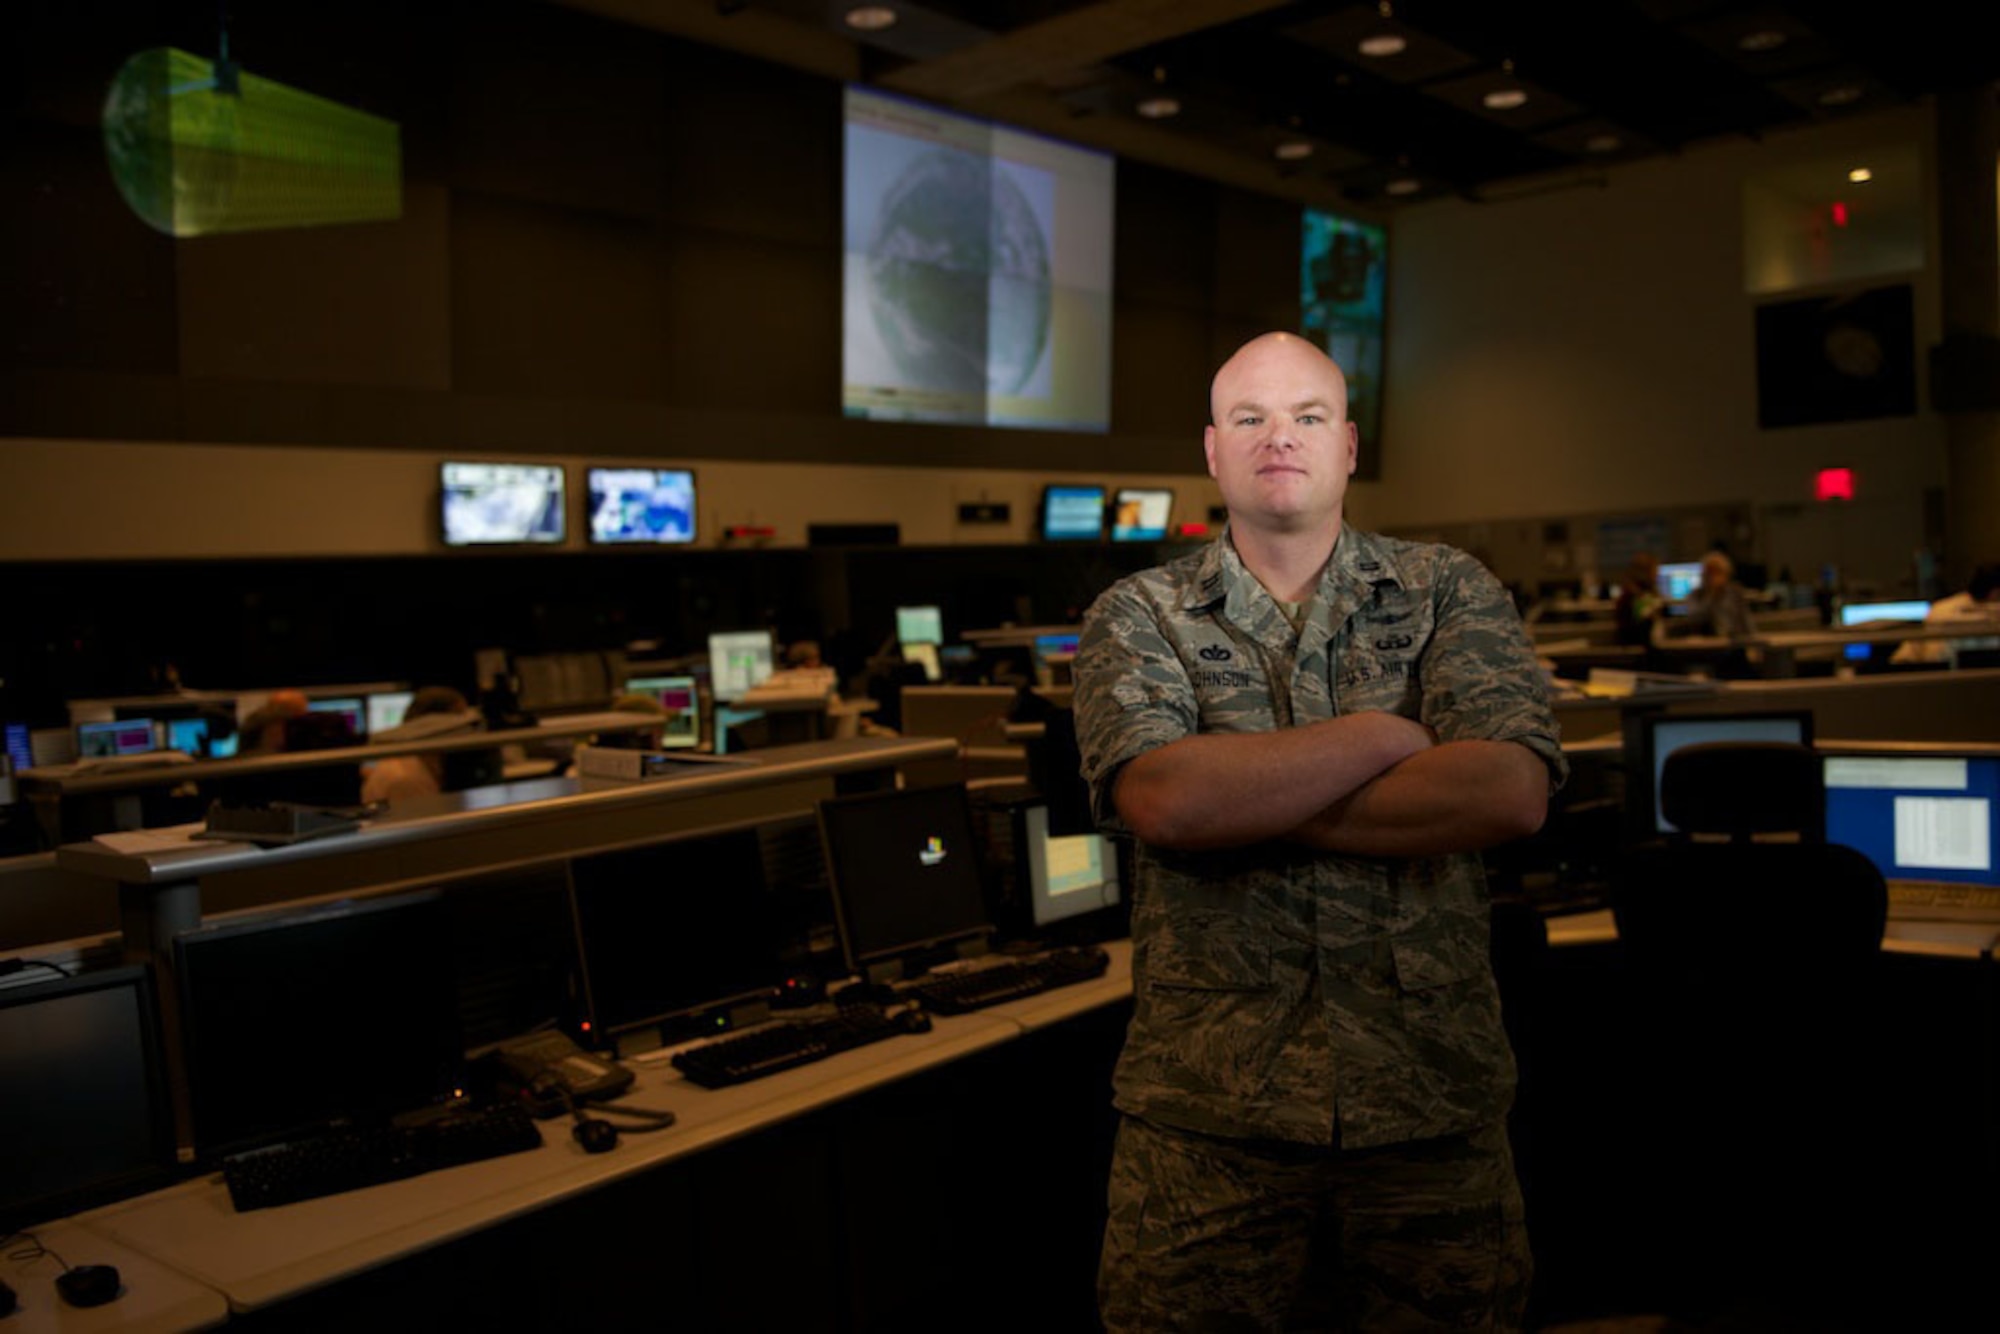 Capt. Tyson Johnson stands in the satellite operations center Sept. 25, 2014, at the National Oceanic and Atmospheric Administration’s satellite operations facility in Suitland, Md. Johnson is the ground flight commander with Detachment 1, 50th Space Operations Group. The geographically separated unit manages the Defense Meteorological Satellite Program – the only weather satellite system in the DOD – in cooperation with NOAA engineers and satellite operators. The system supplies weather data to the Air Force Weather agency as well as military and civilian organizations around the world. (U.S. Air Force photo/Senior Airman Alexander W. Riedel)